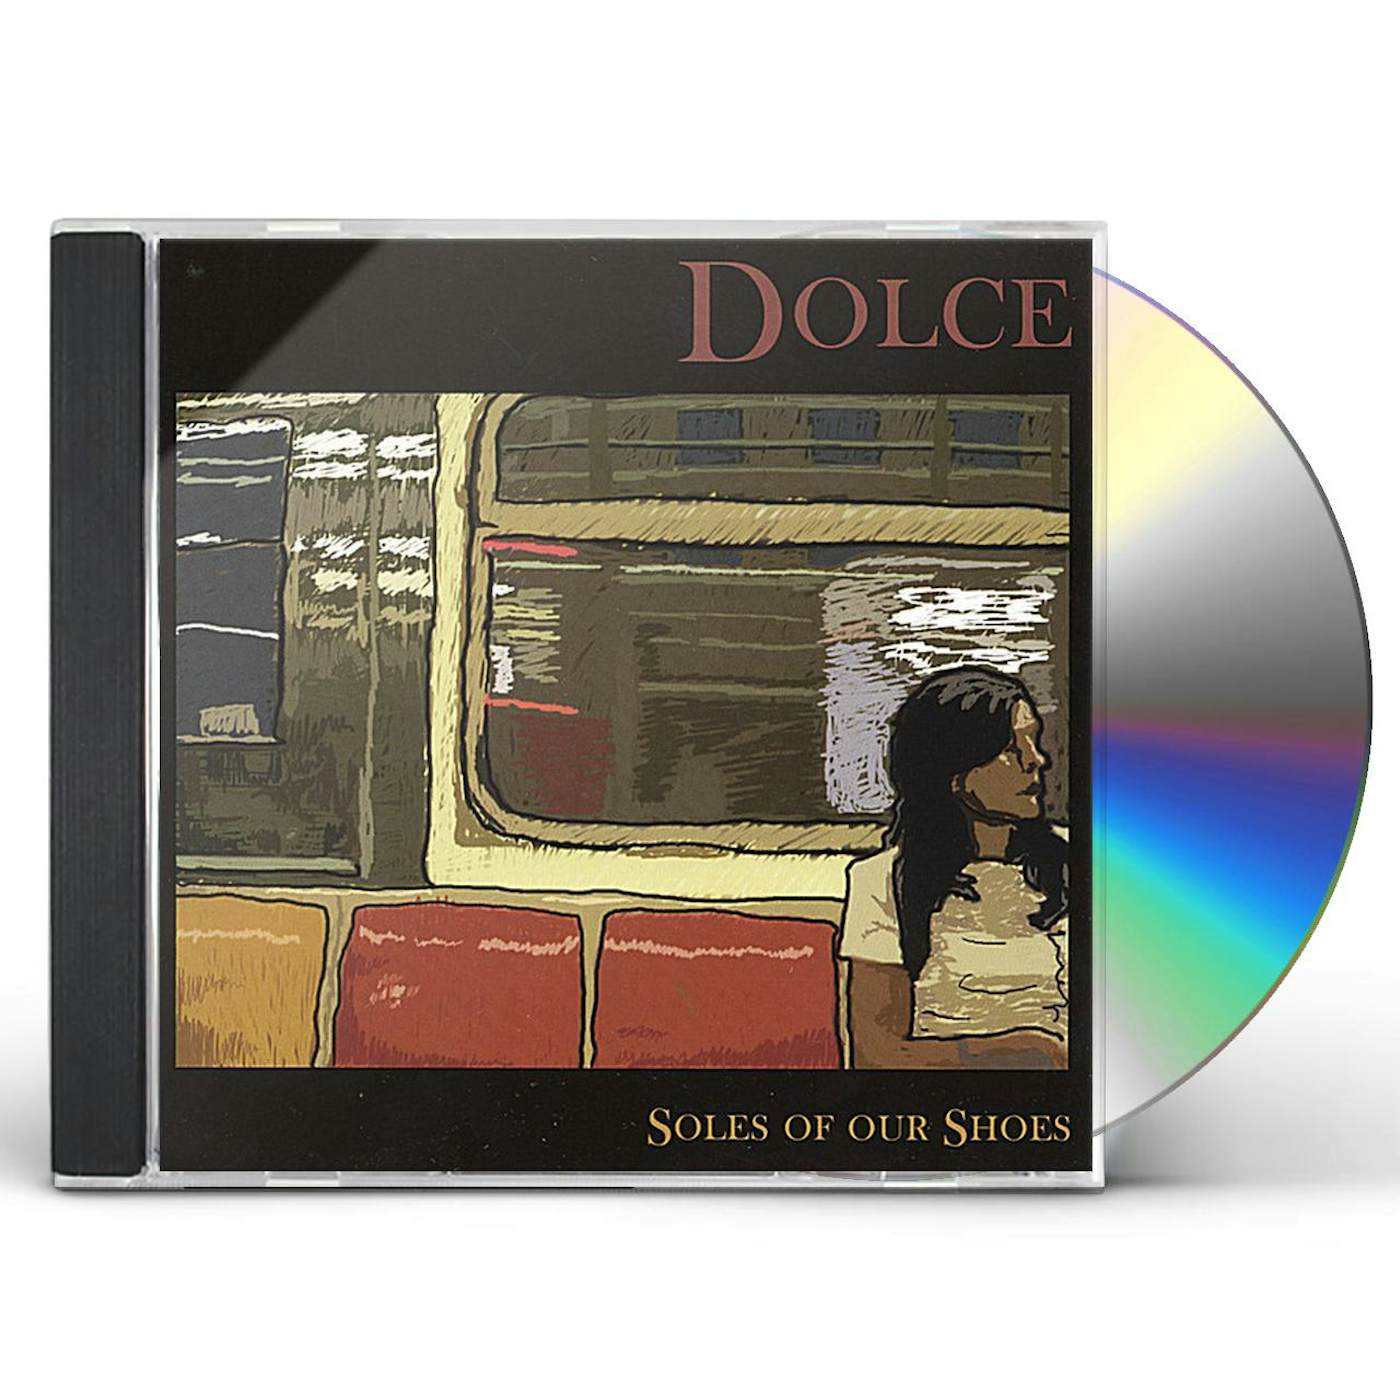 Dolce SOLES OF OUR SHOES CD